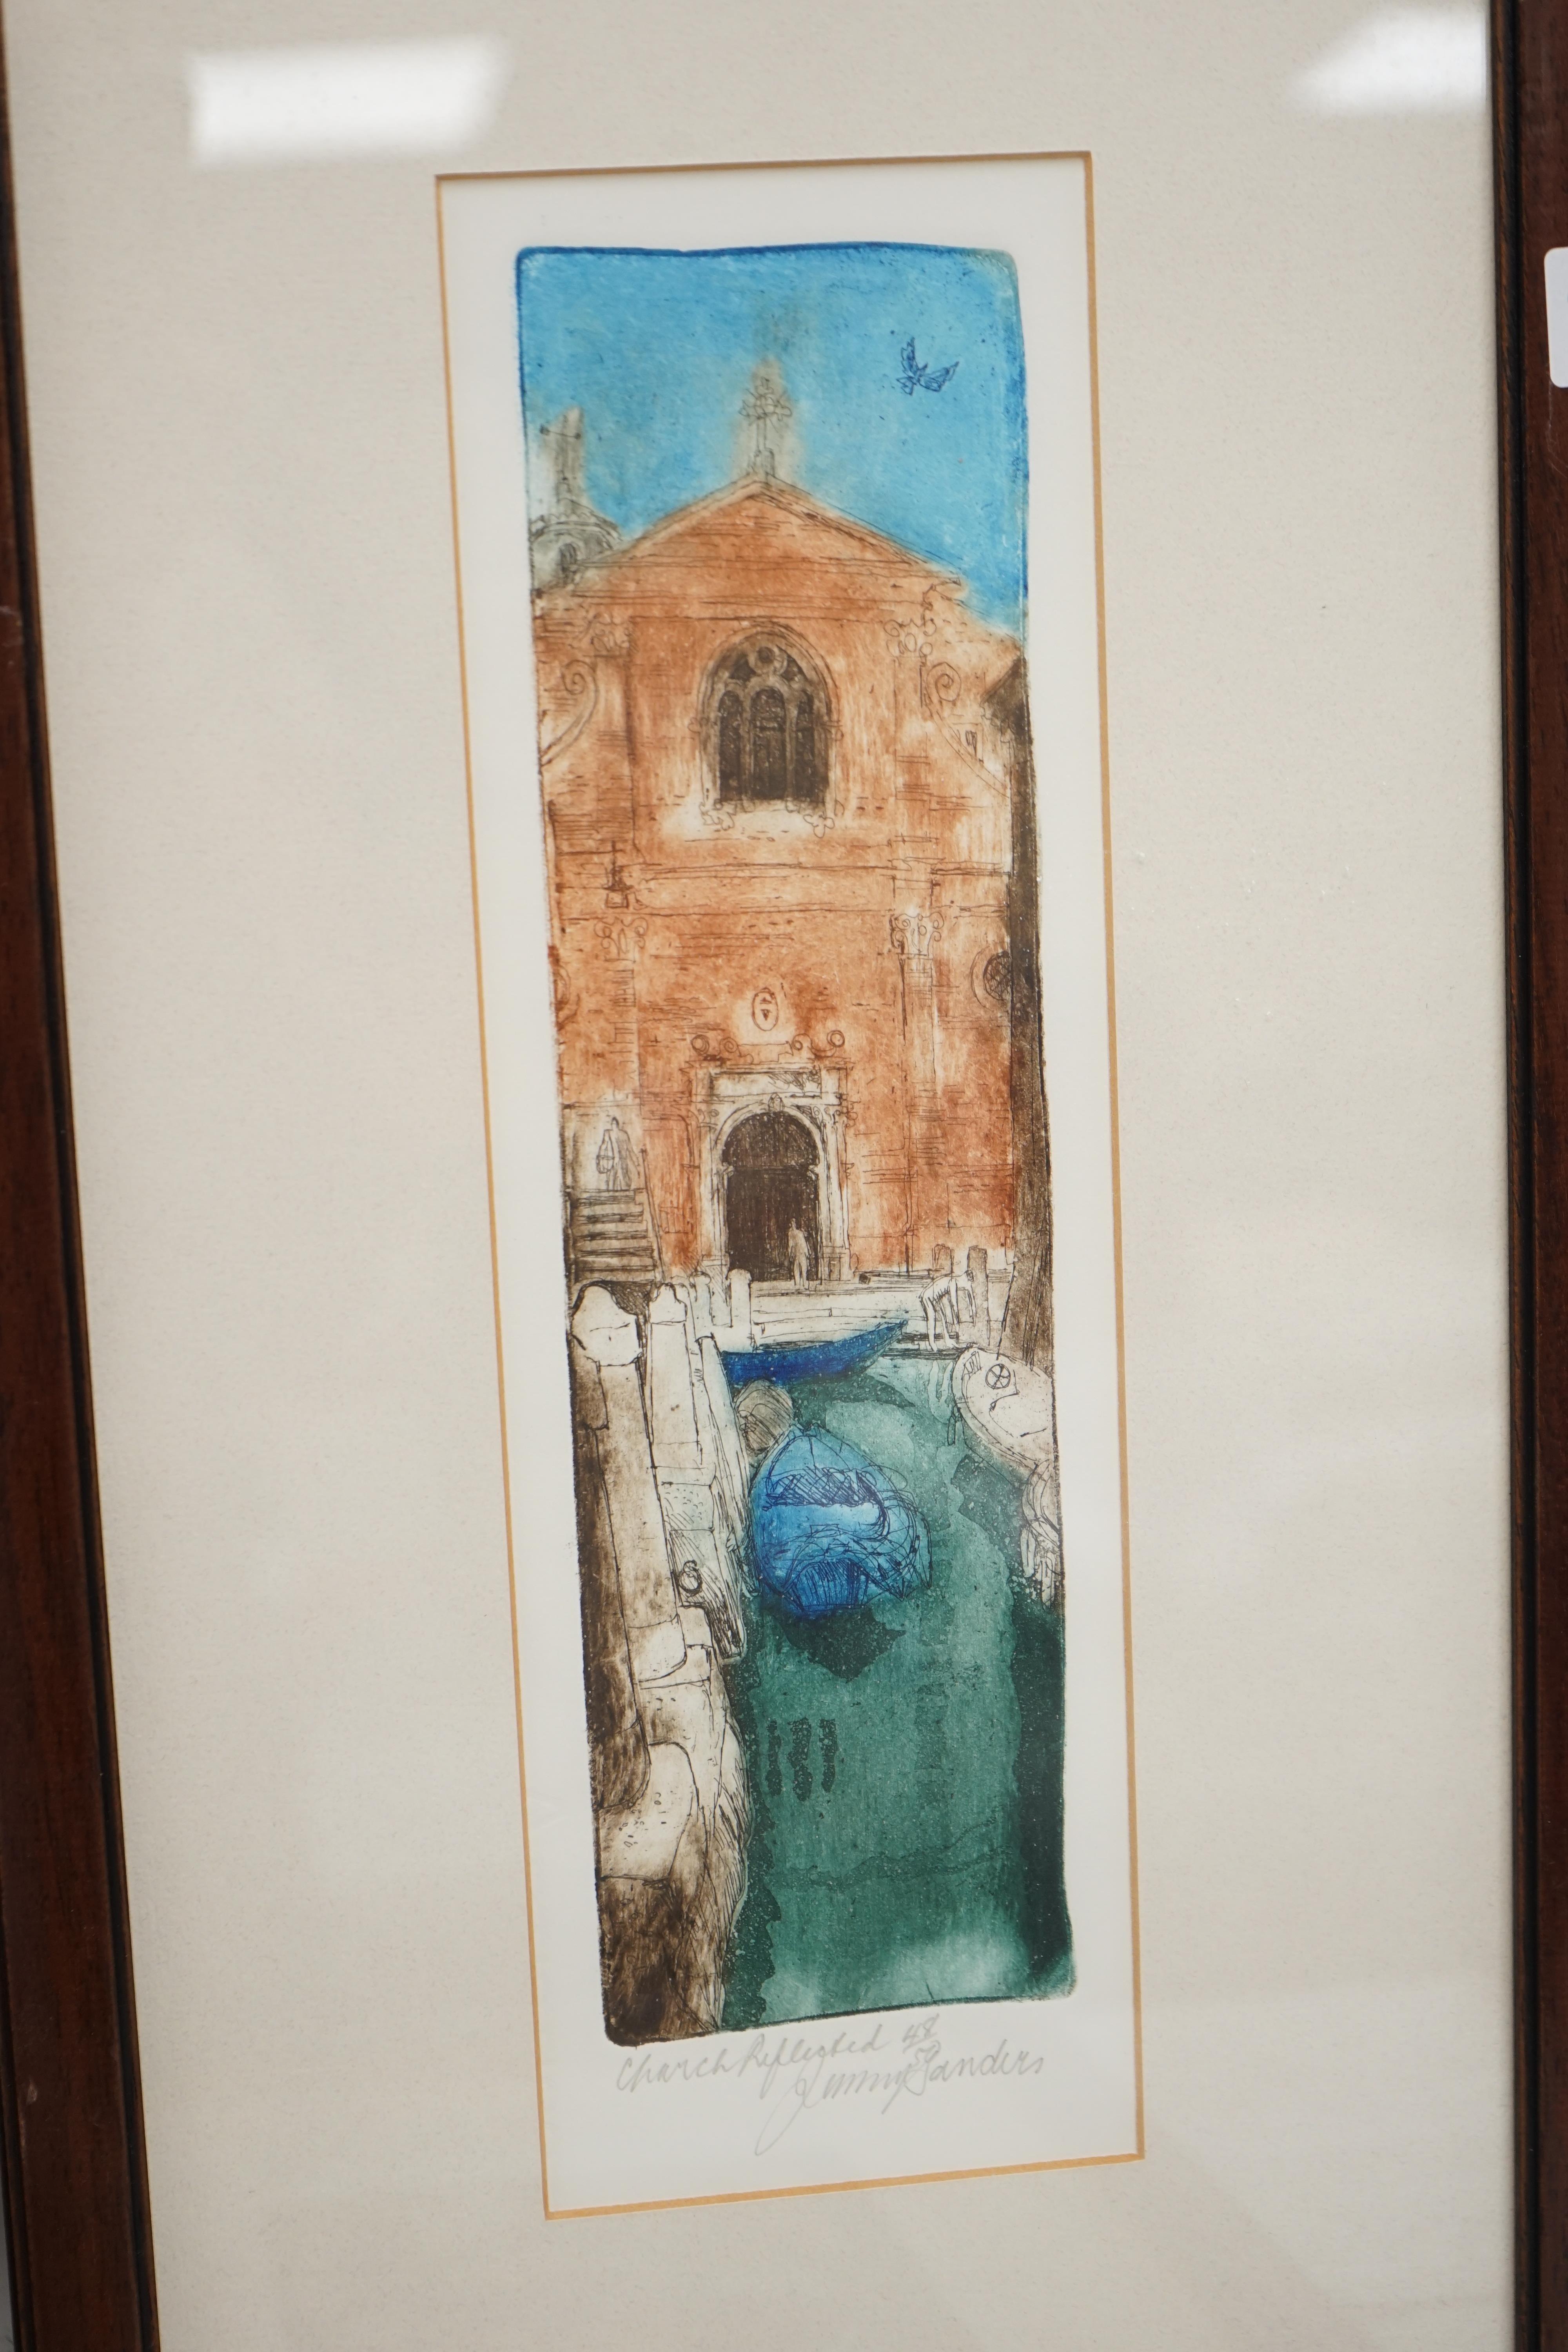 Jenny Sanders, four colour etchings, Venetian scenes including ‘St. Mark's, Venice’ and ‘Castello Sestiere’, each pencil signed and limited edition, largest 31 x 16cm. Condition - good